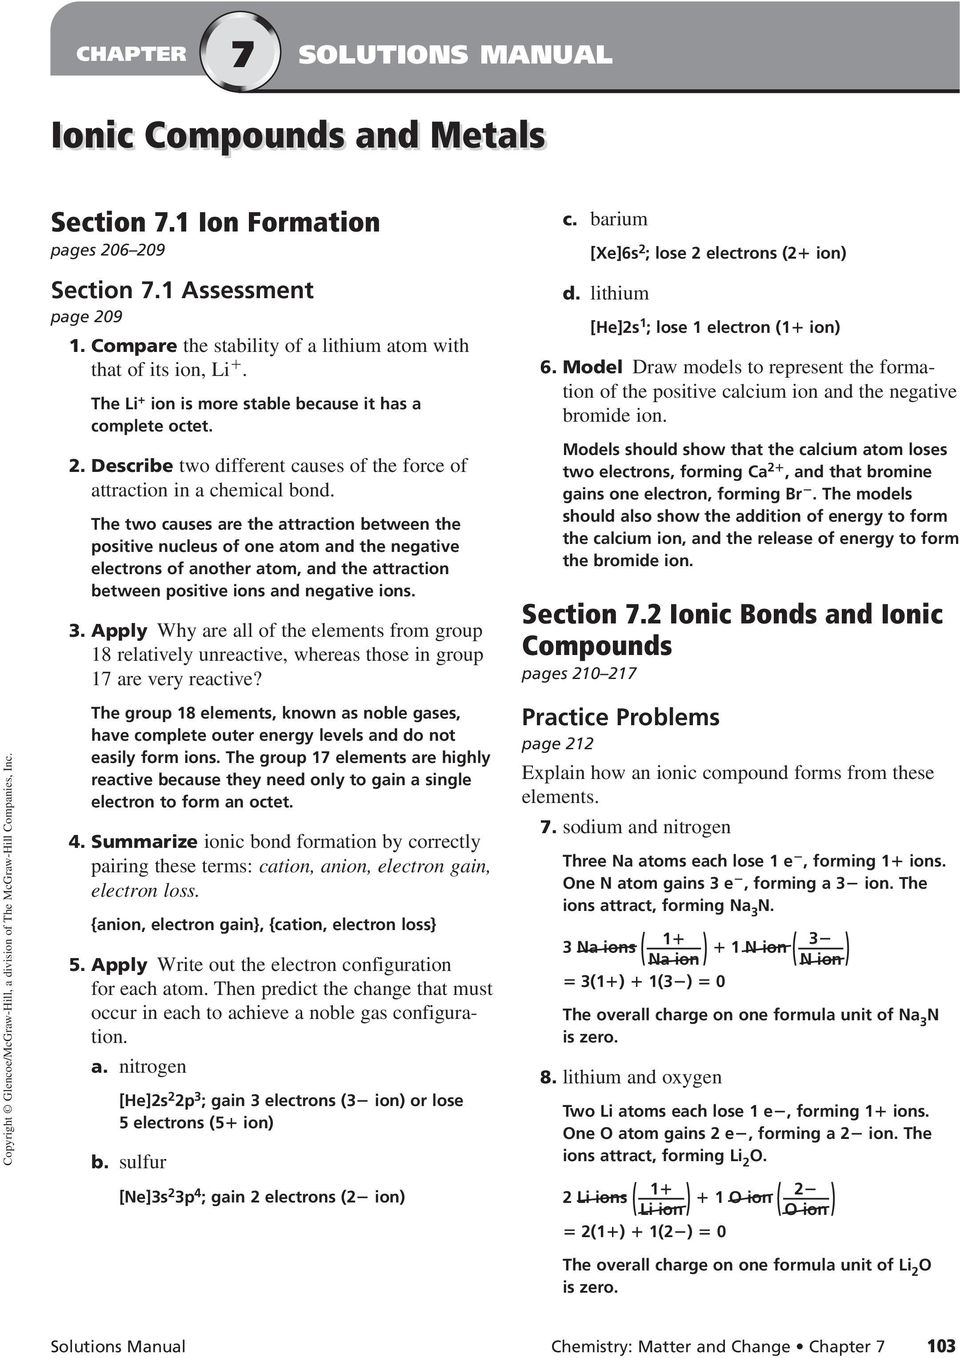 Ionic Compounds And Metals Pdf Free Download